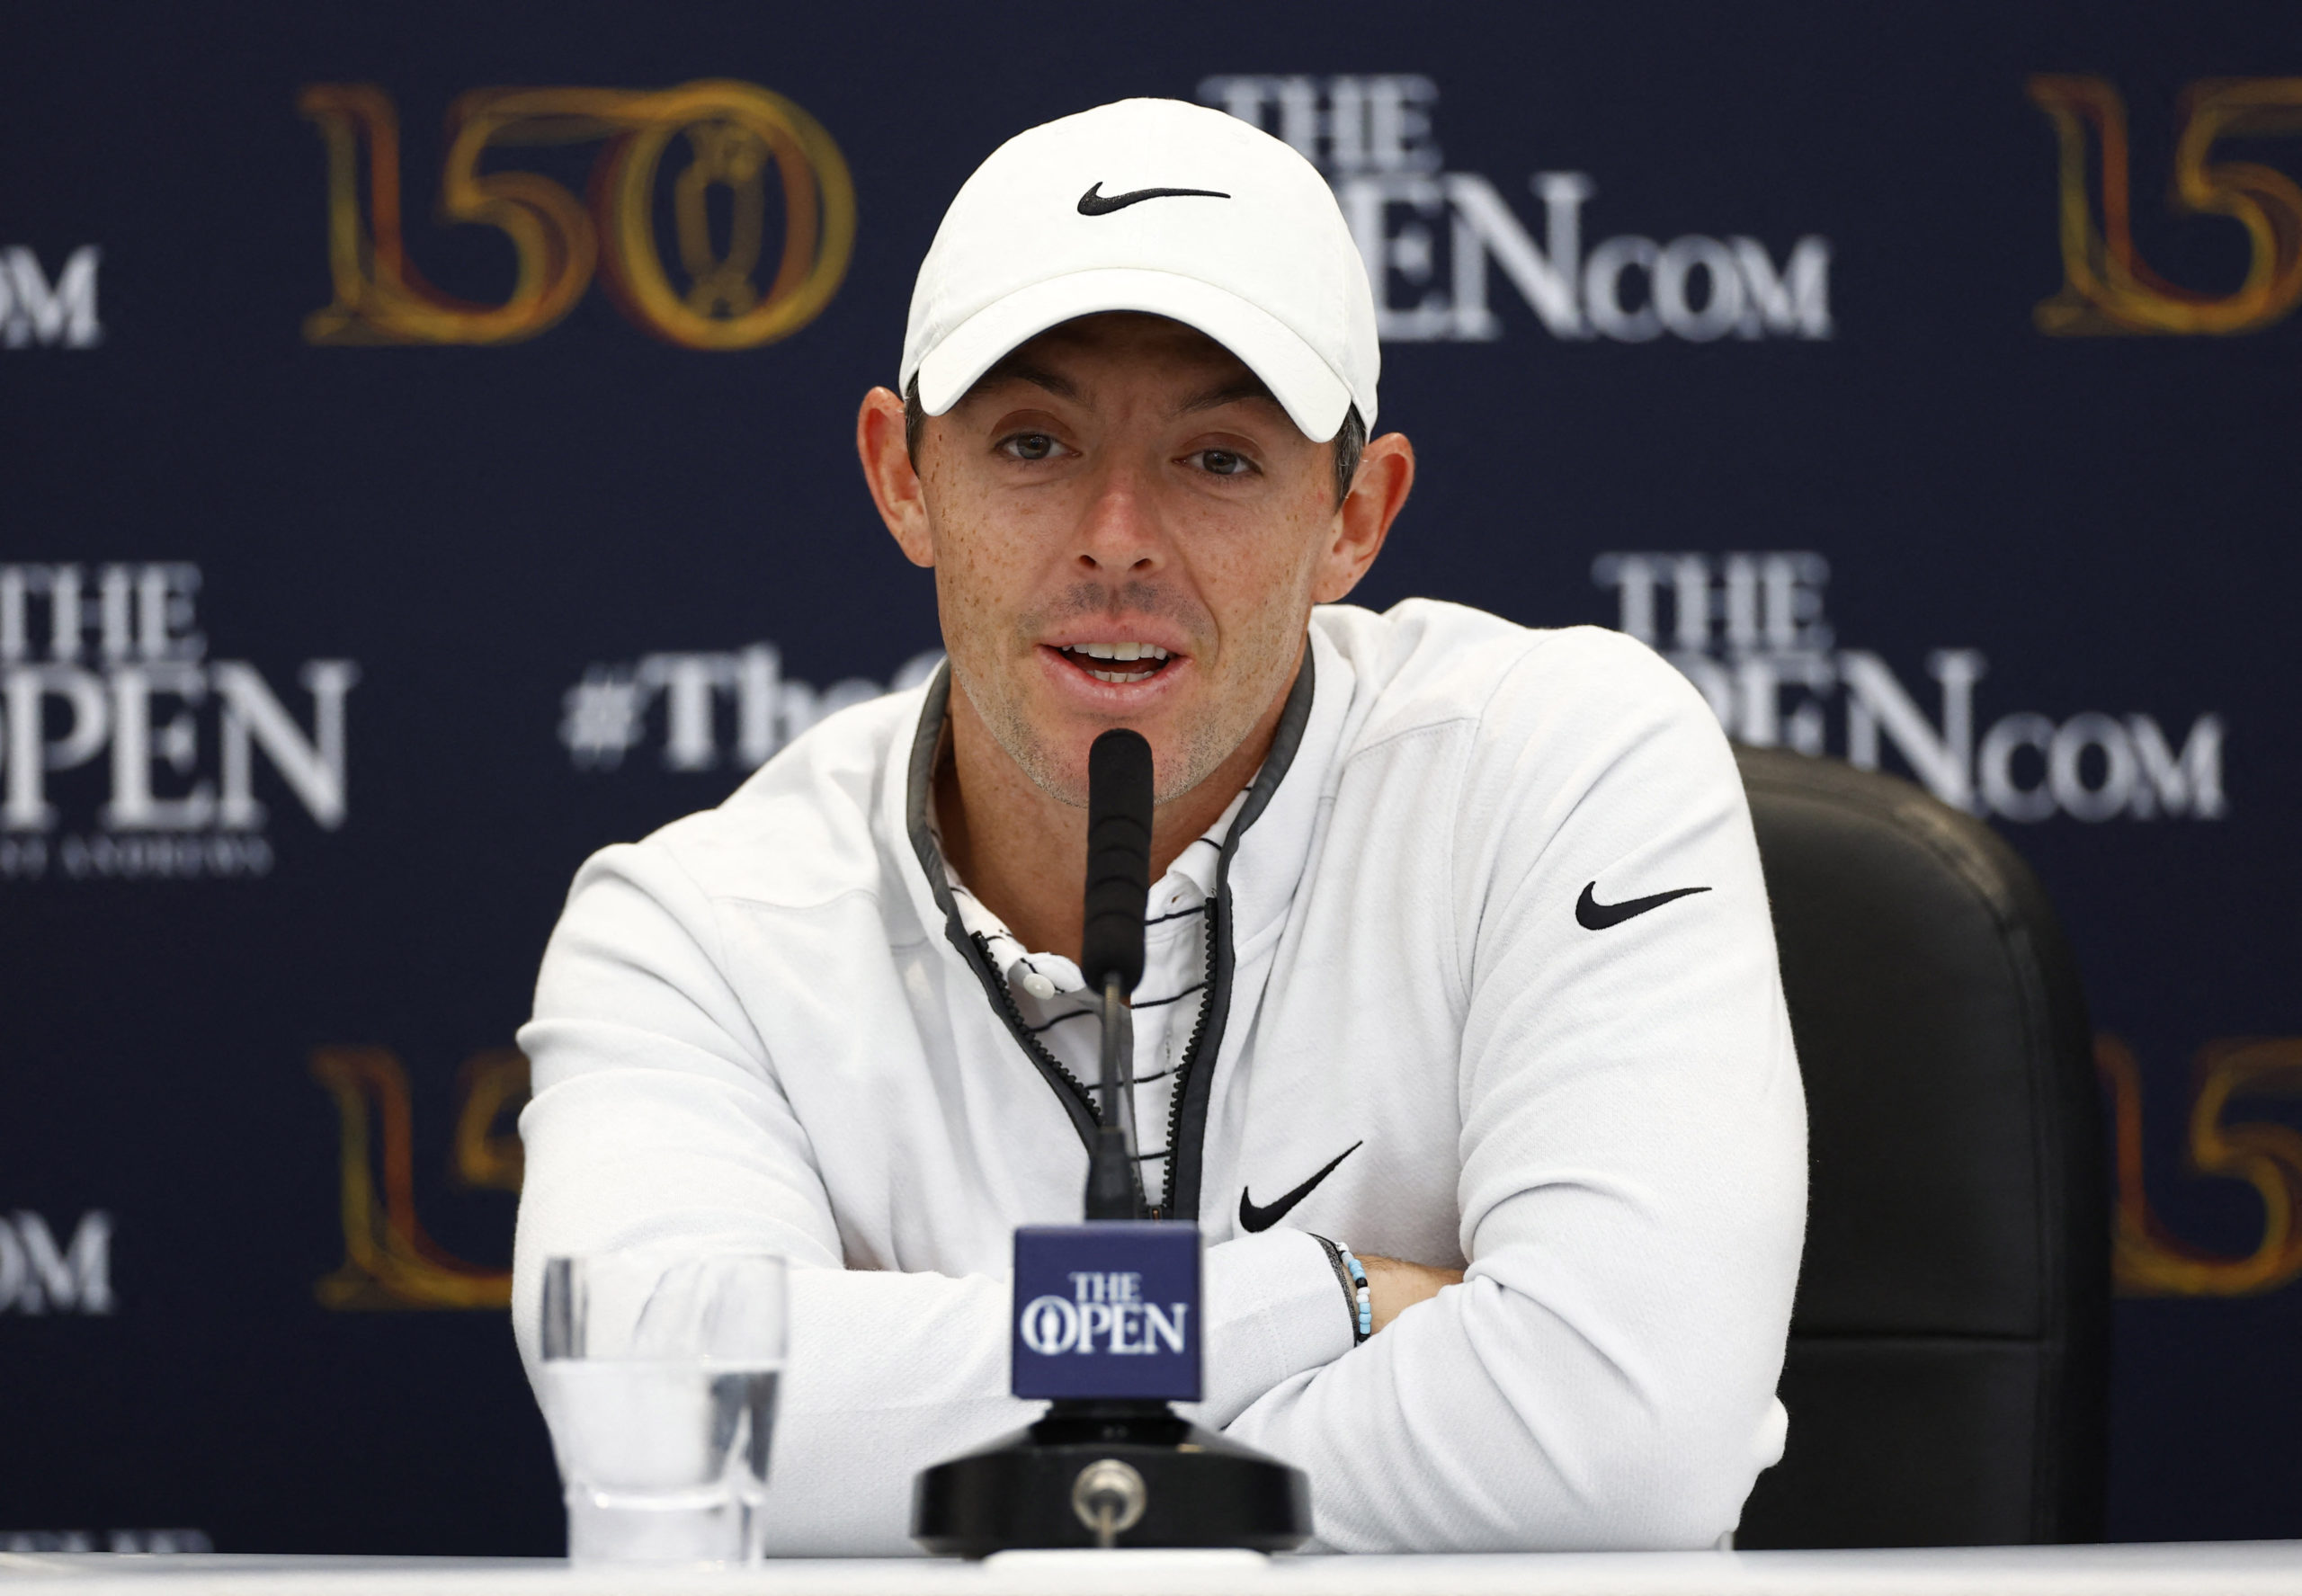 Northern Ireland's Rory McIlroy during a press conference 